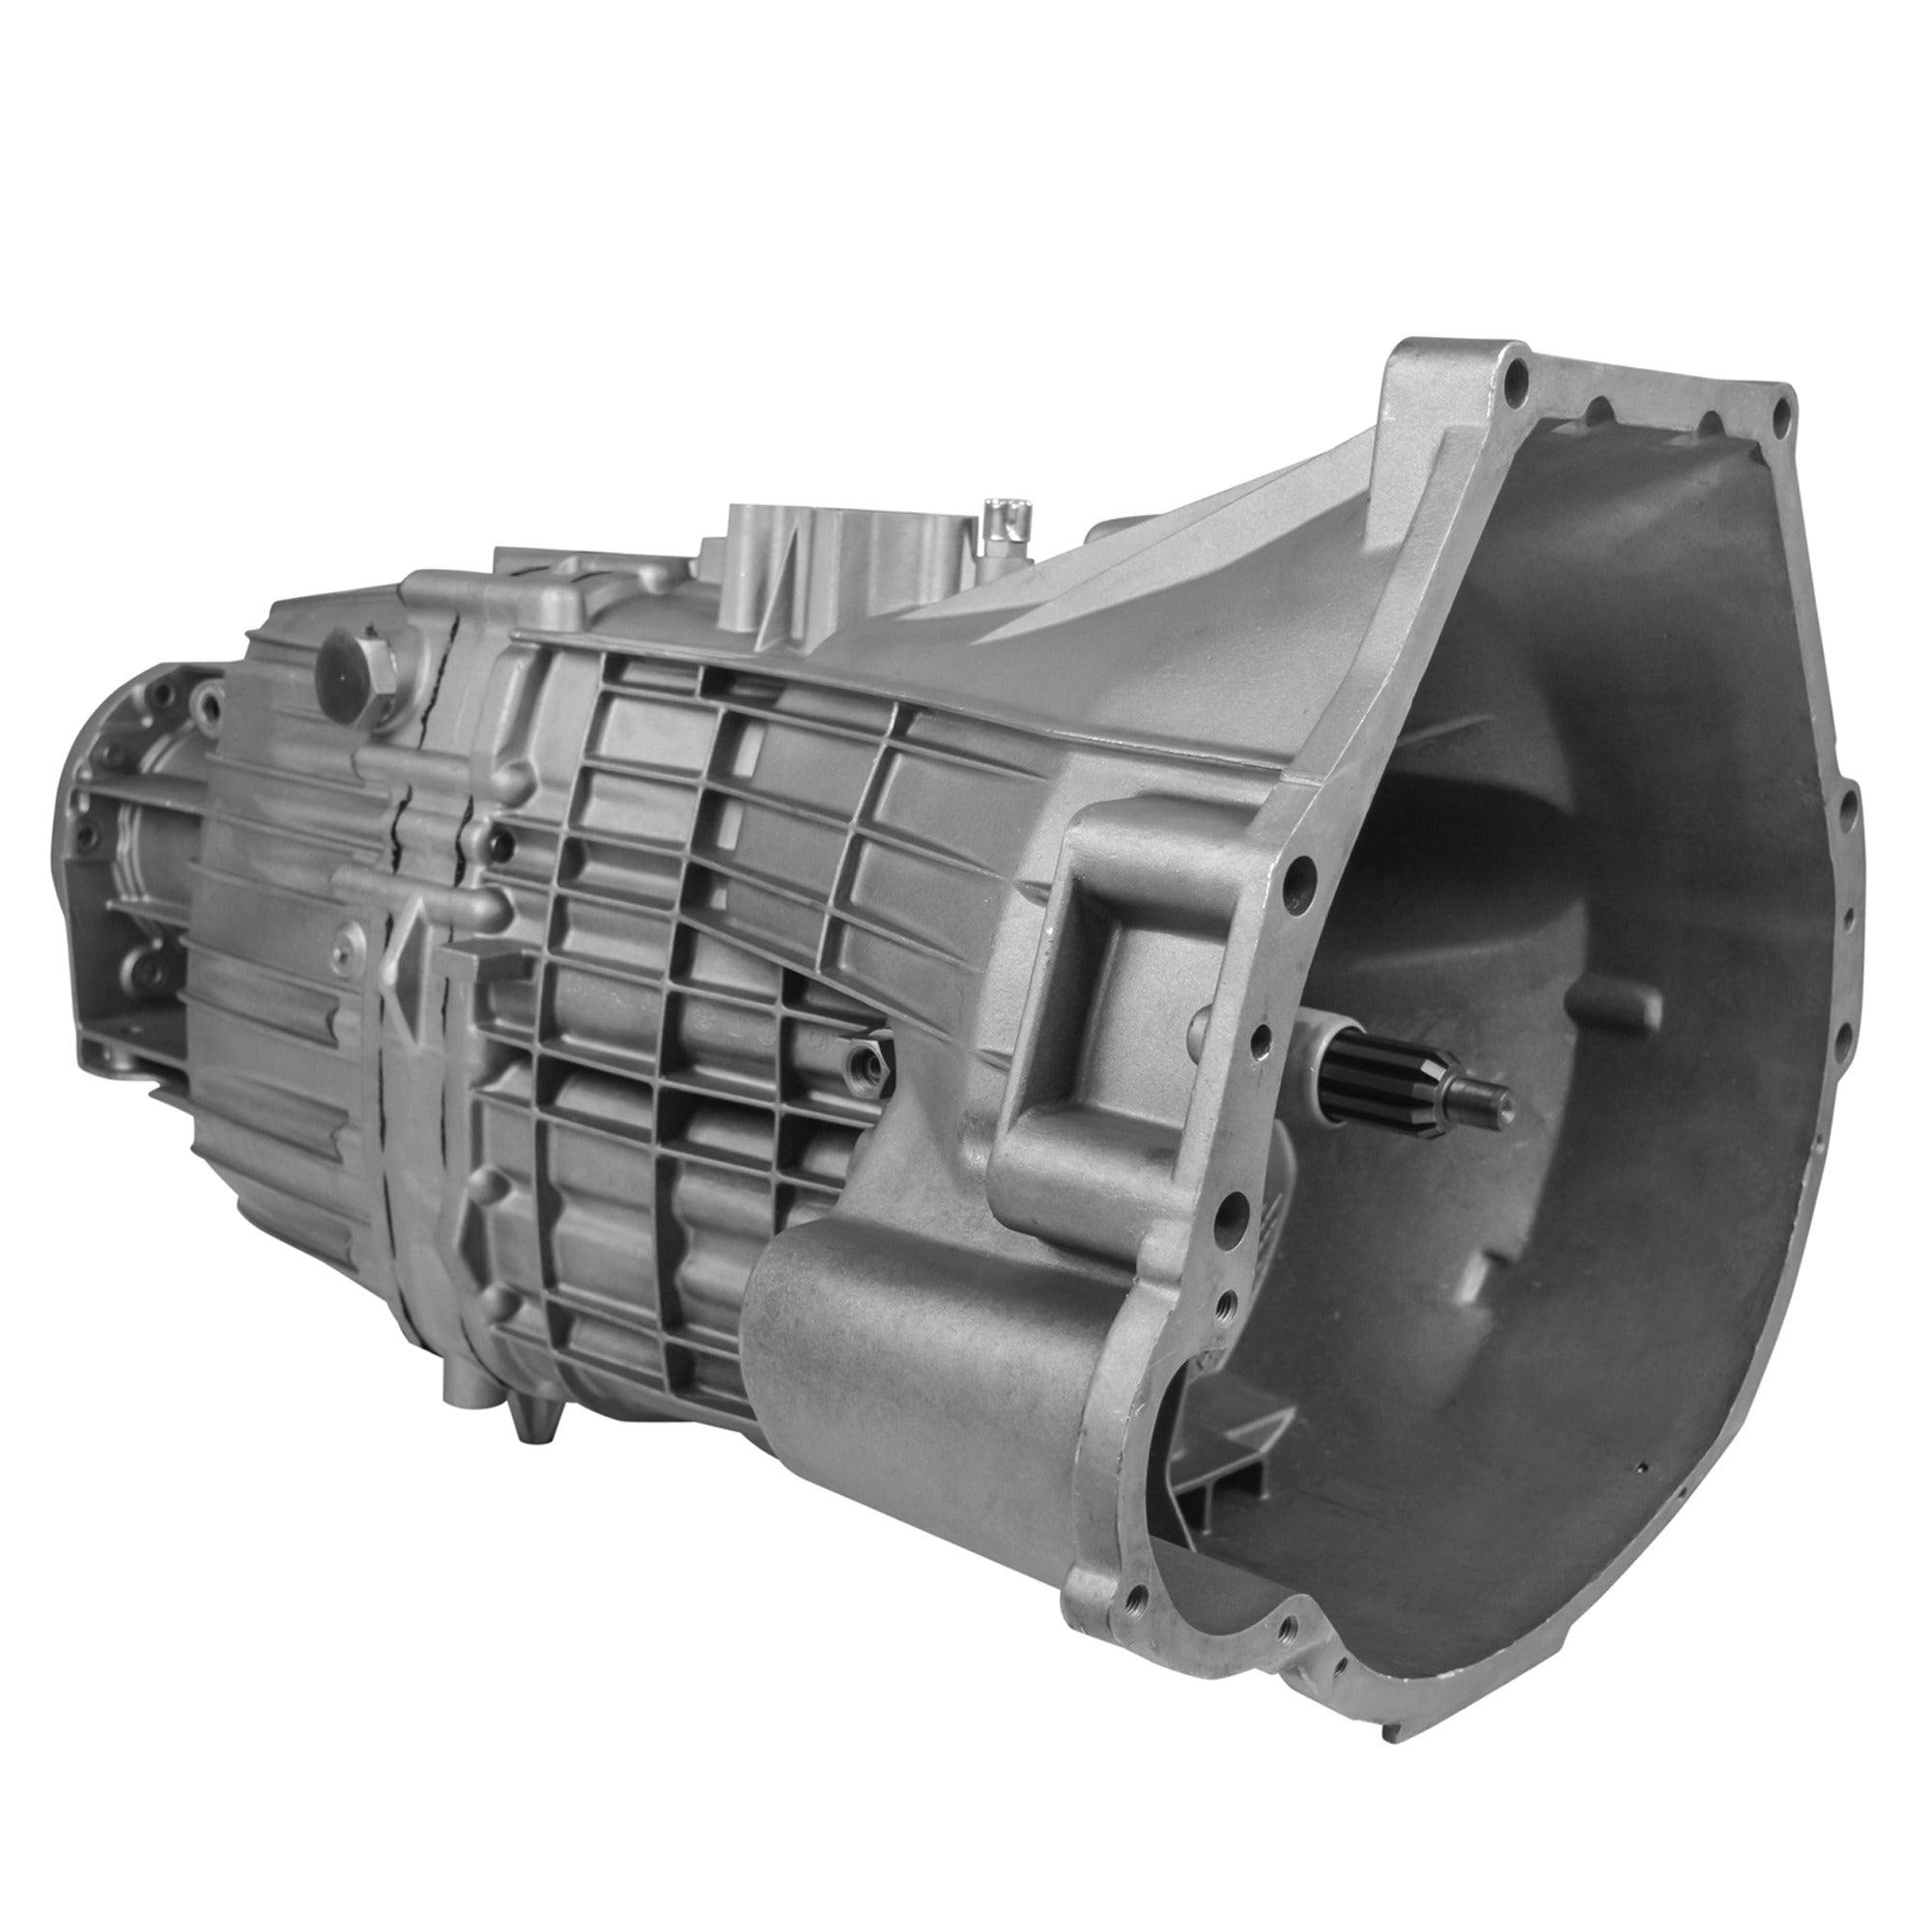 Manual Transmission for 1999-2000 Ford F-250/350/450/550 Super Duty 4WD with 7.3L V8 Engine